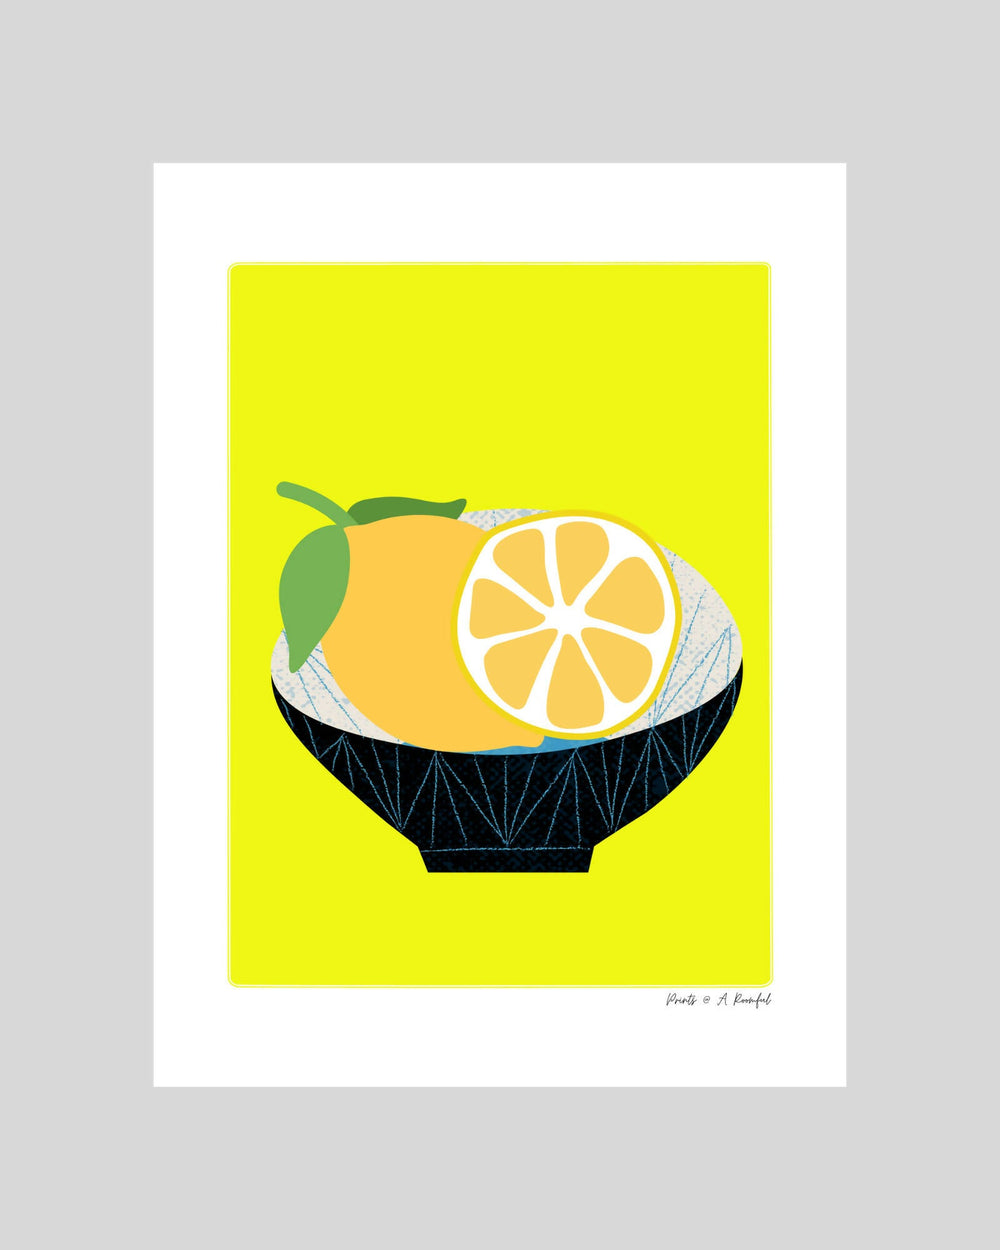 wall art : inspired by colours and fruits (lemon) Art Prints@ARoomful 